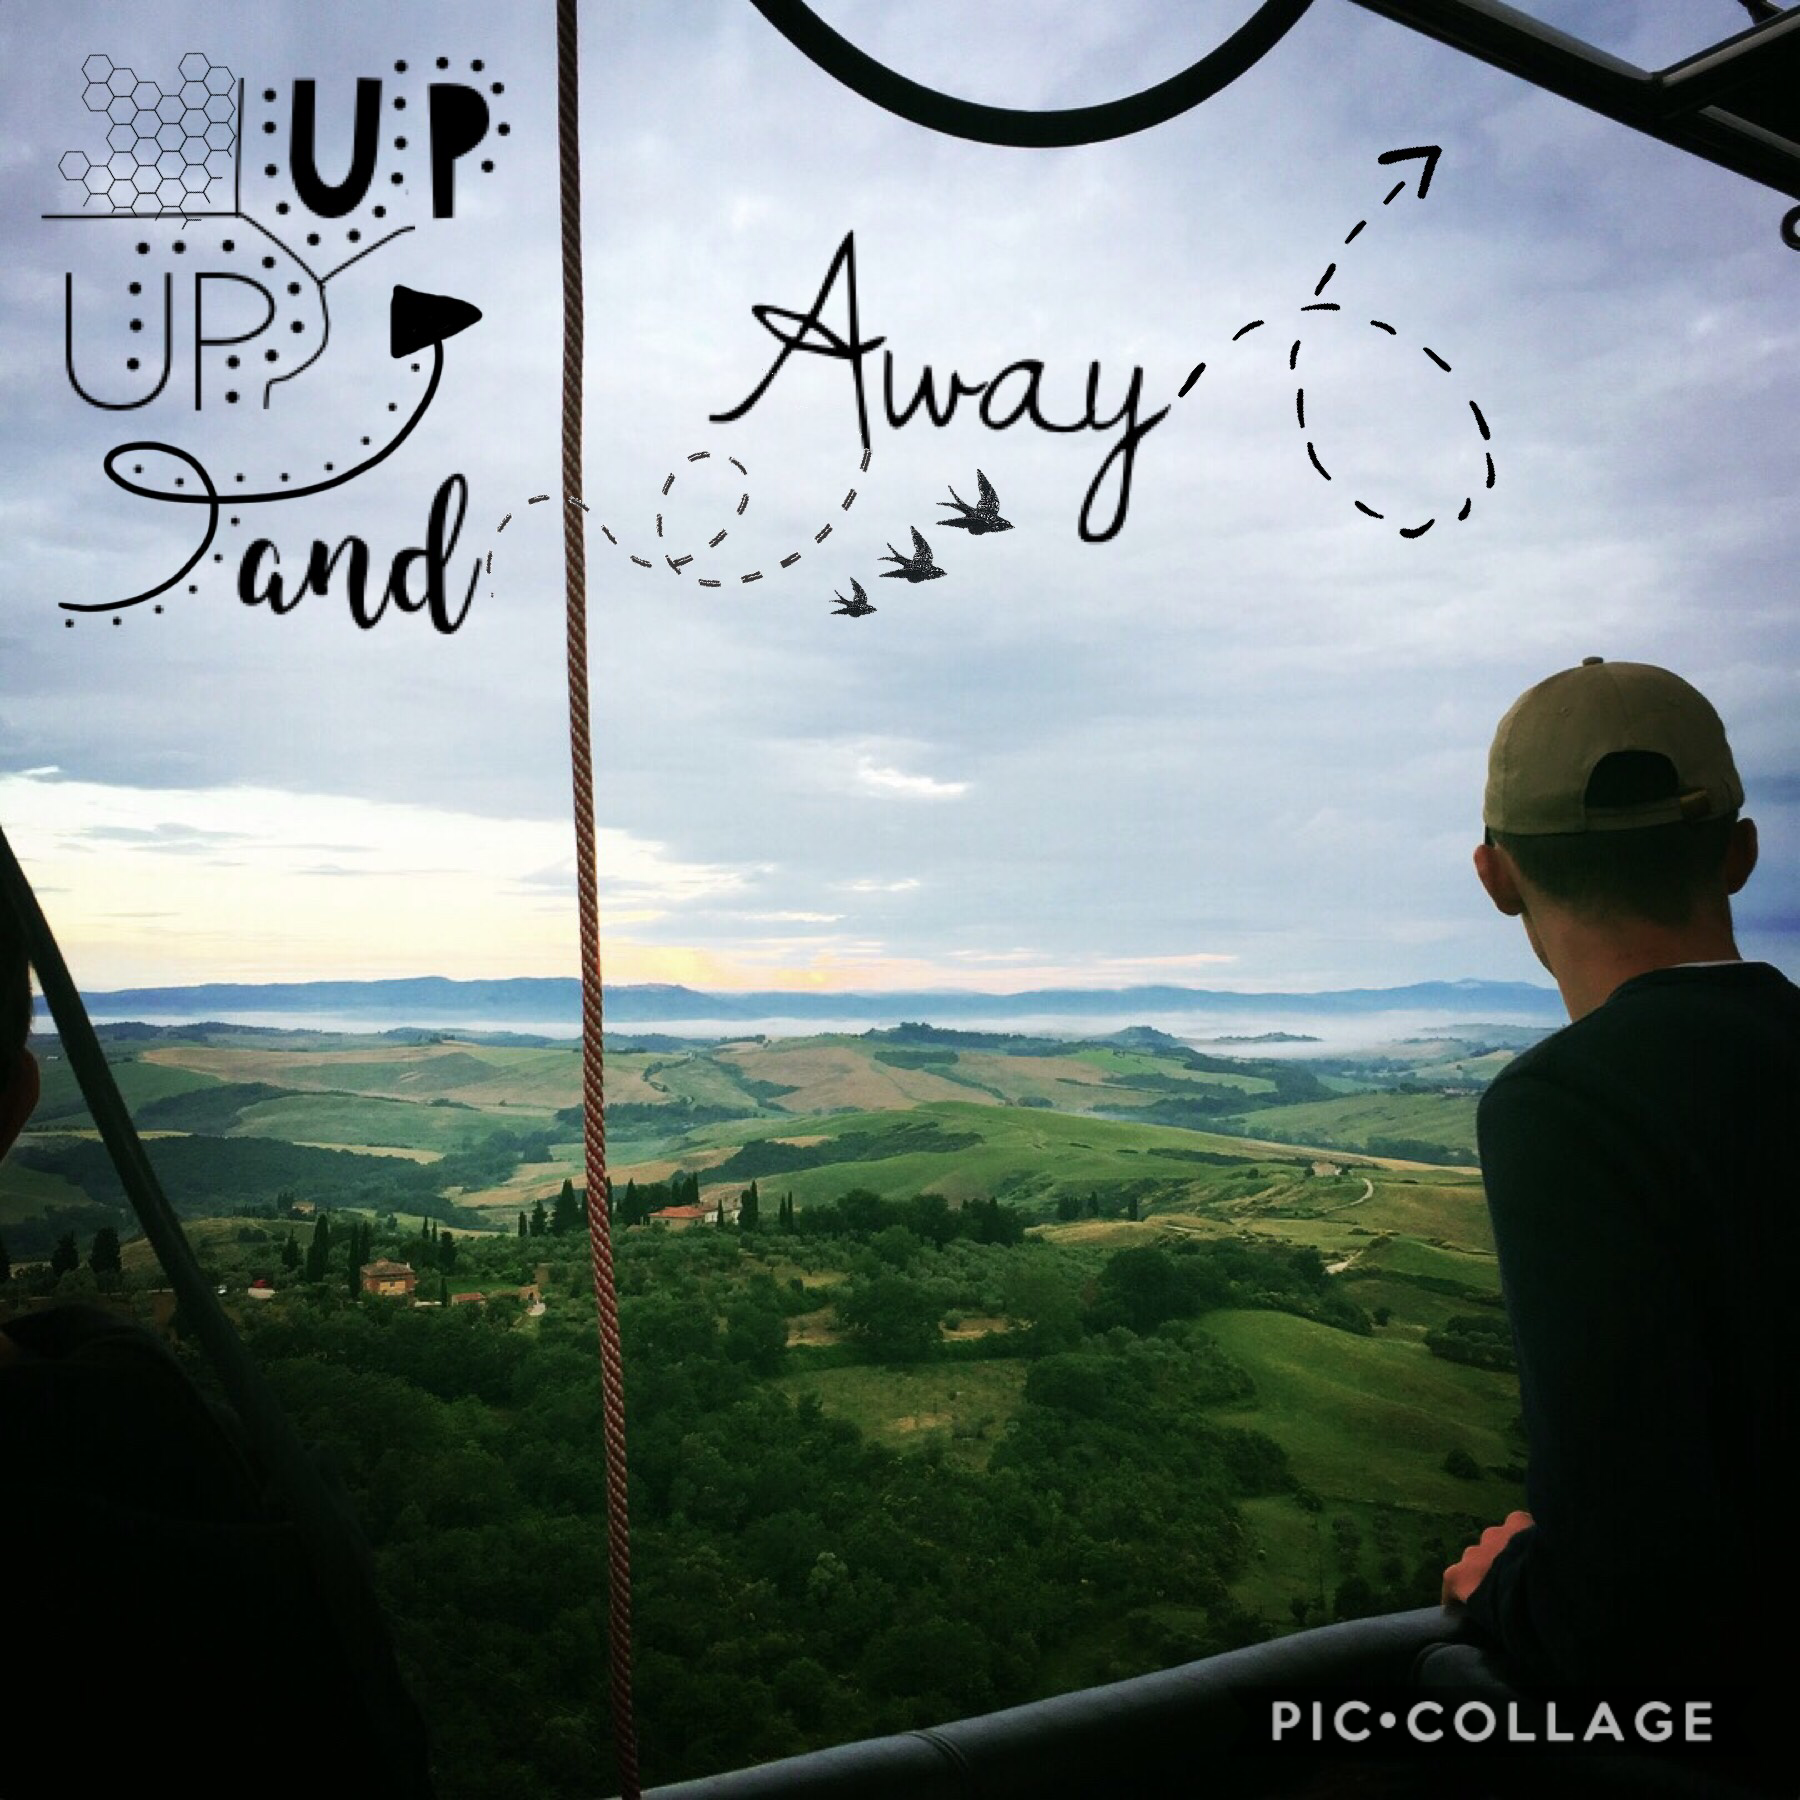 ⛰➰♠️
Pic from the hot air balloon in Tuscany 😍